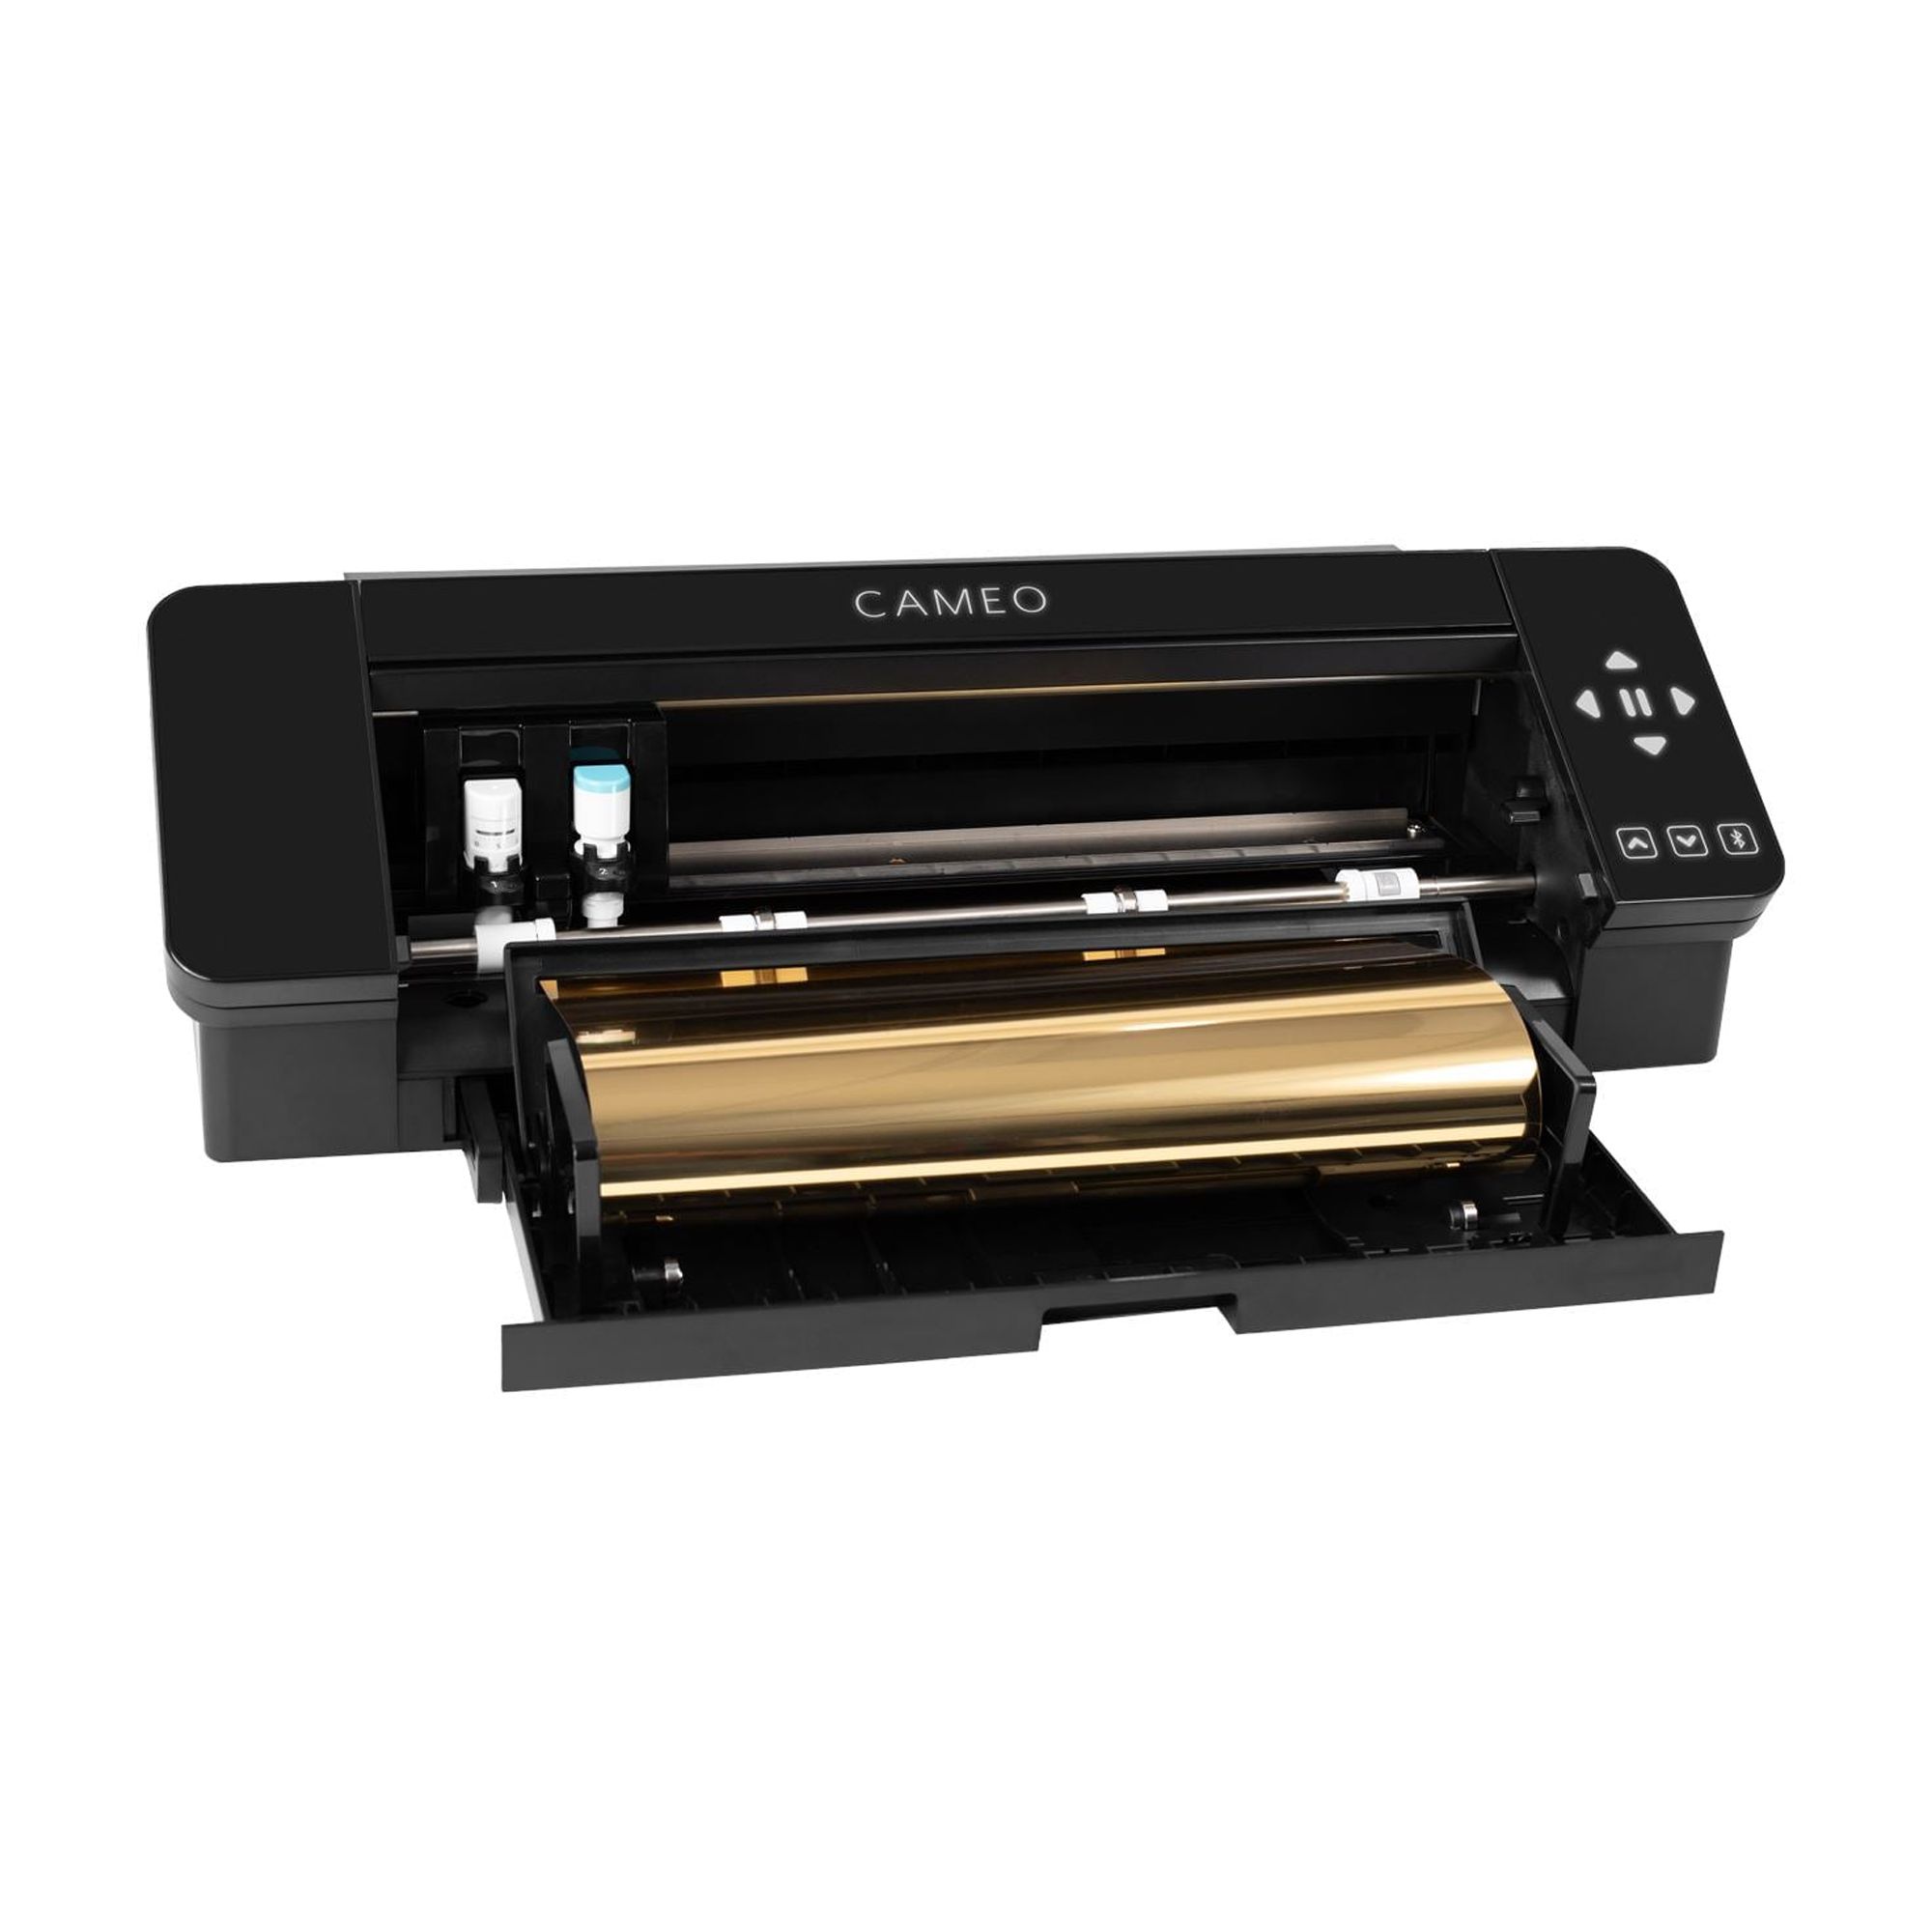 Silhouette Cameo 4 Electronic Cutter, Black - image 2 of 6